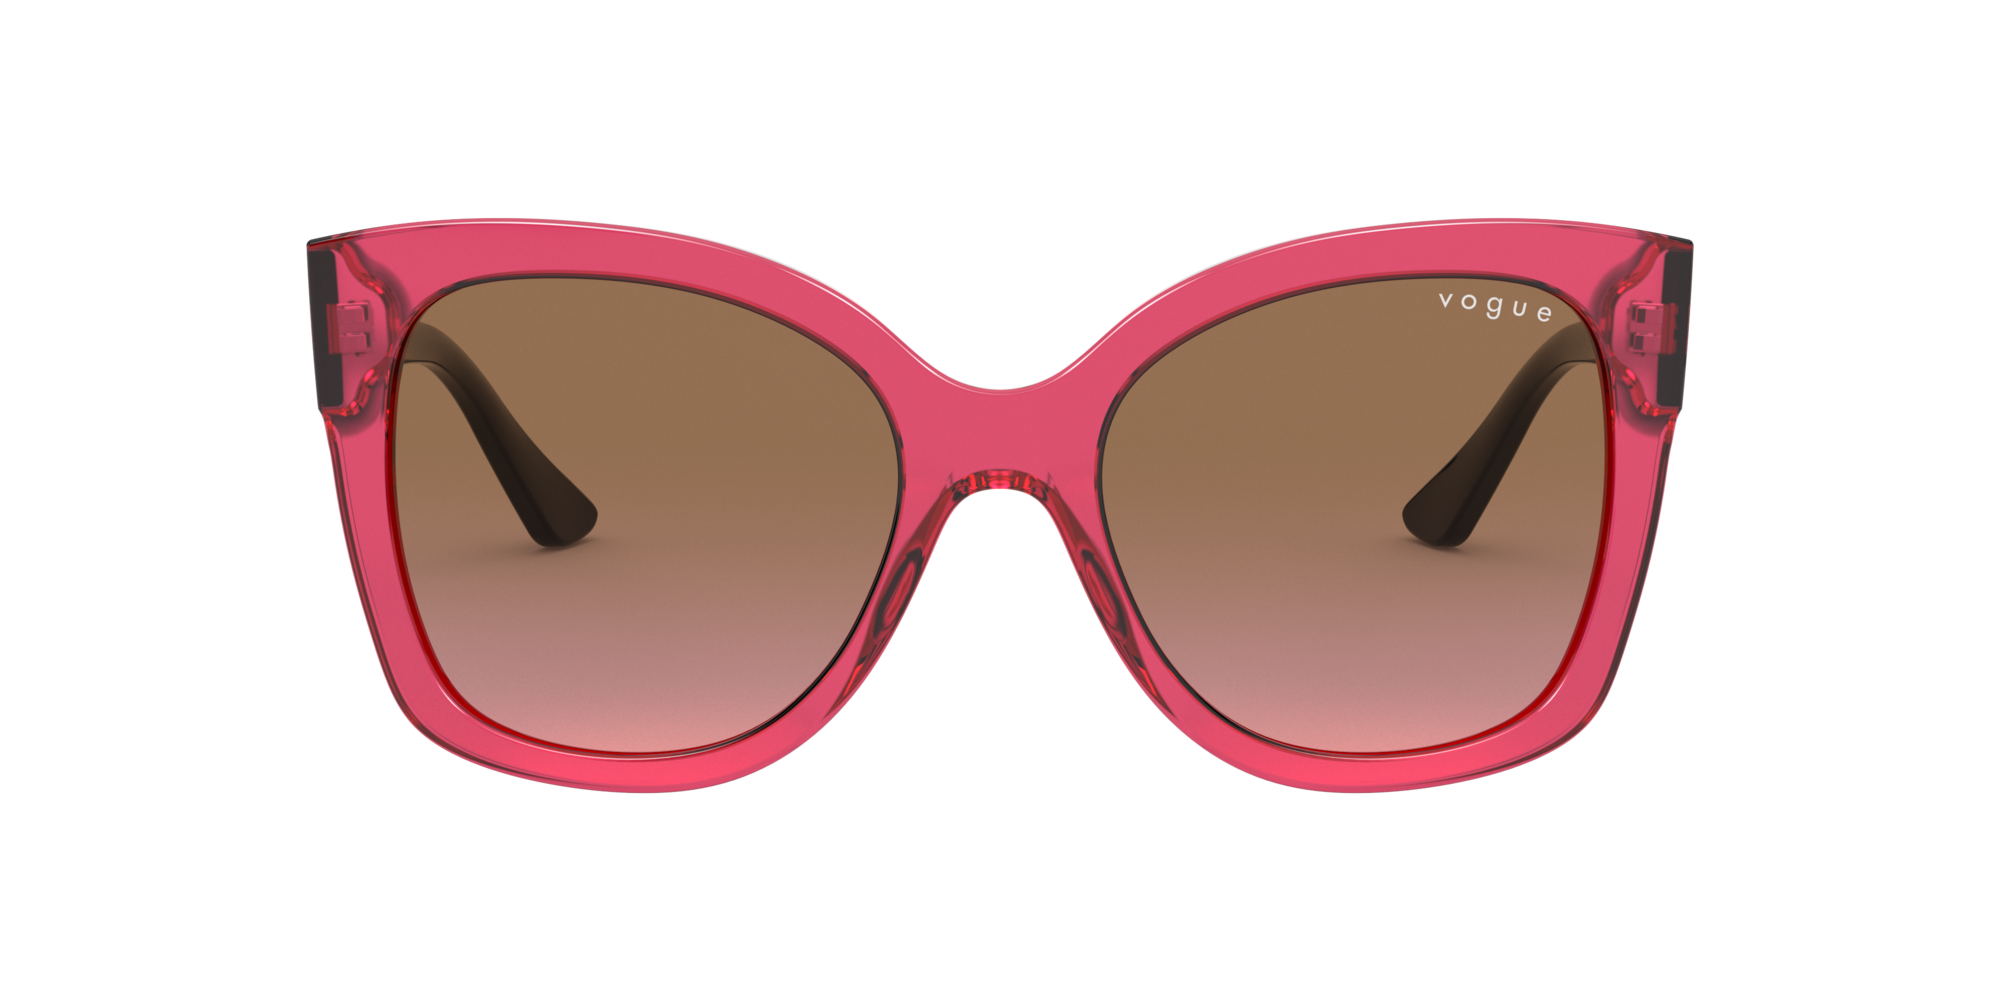 VO5338S 54: Shop Vogue Red/Burgundy Pillow Sunglasses at LensCrafters